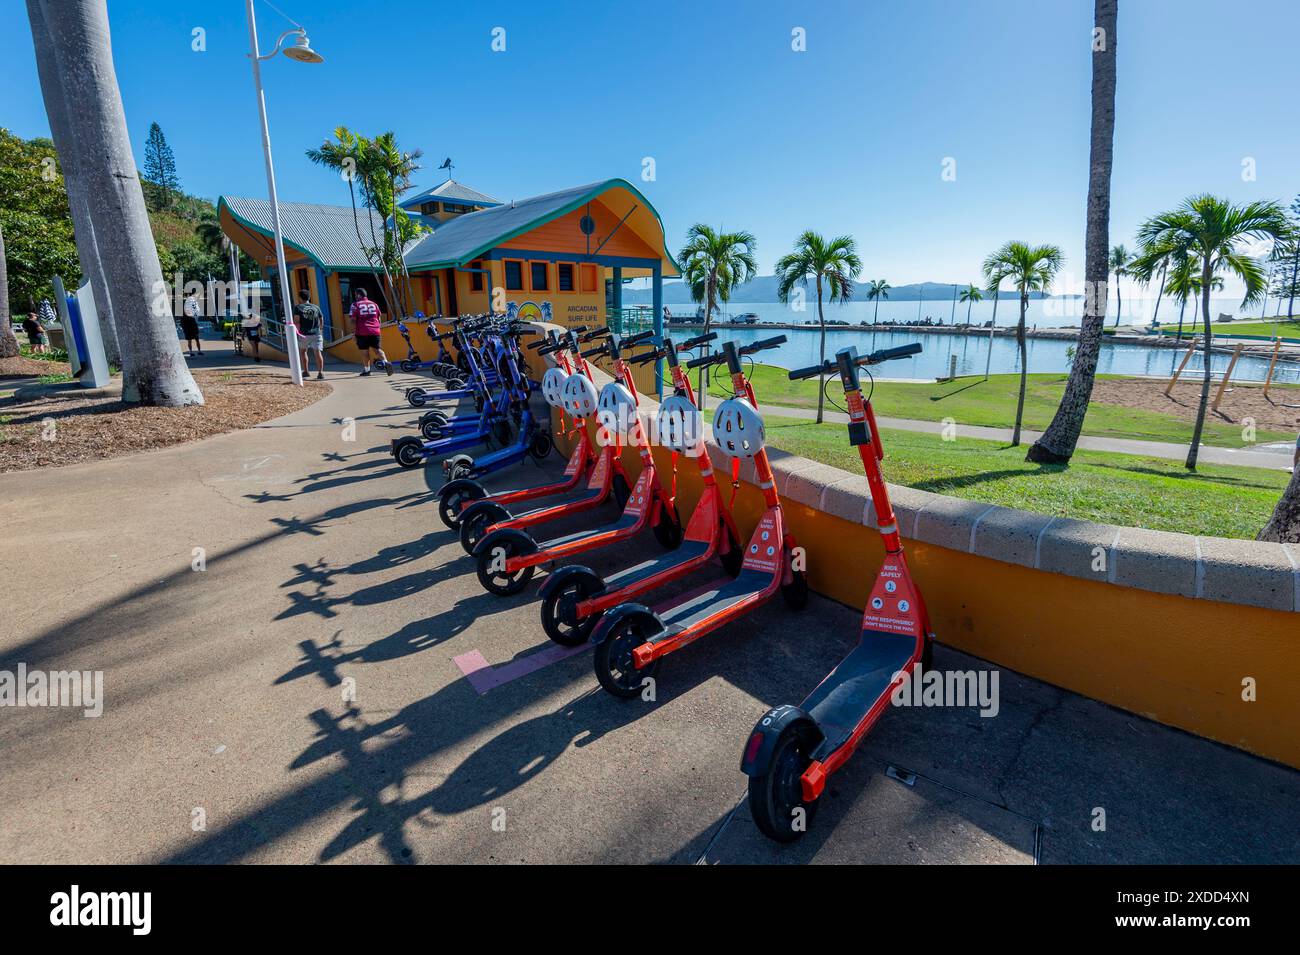 Row of red electric scooters for hire, Strand Park, Townsville, Far North Queensland, FNQ, QLD, Australia Stock Photo